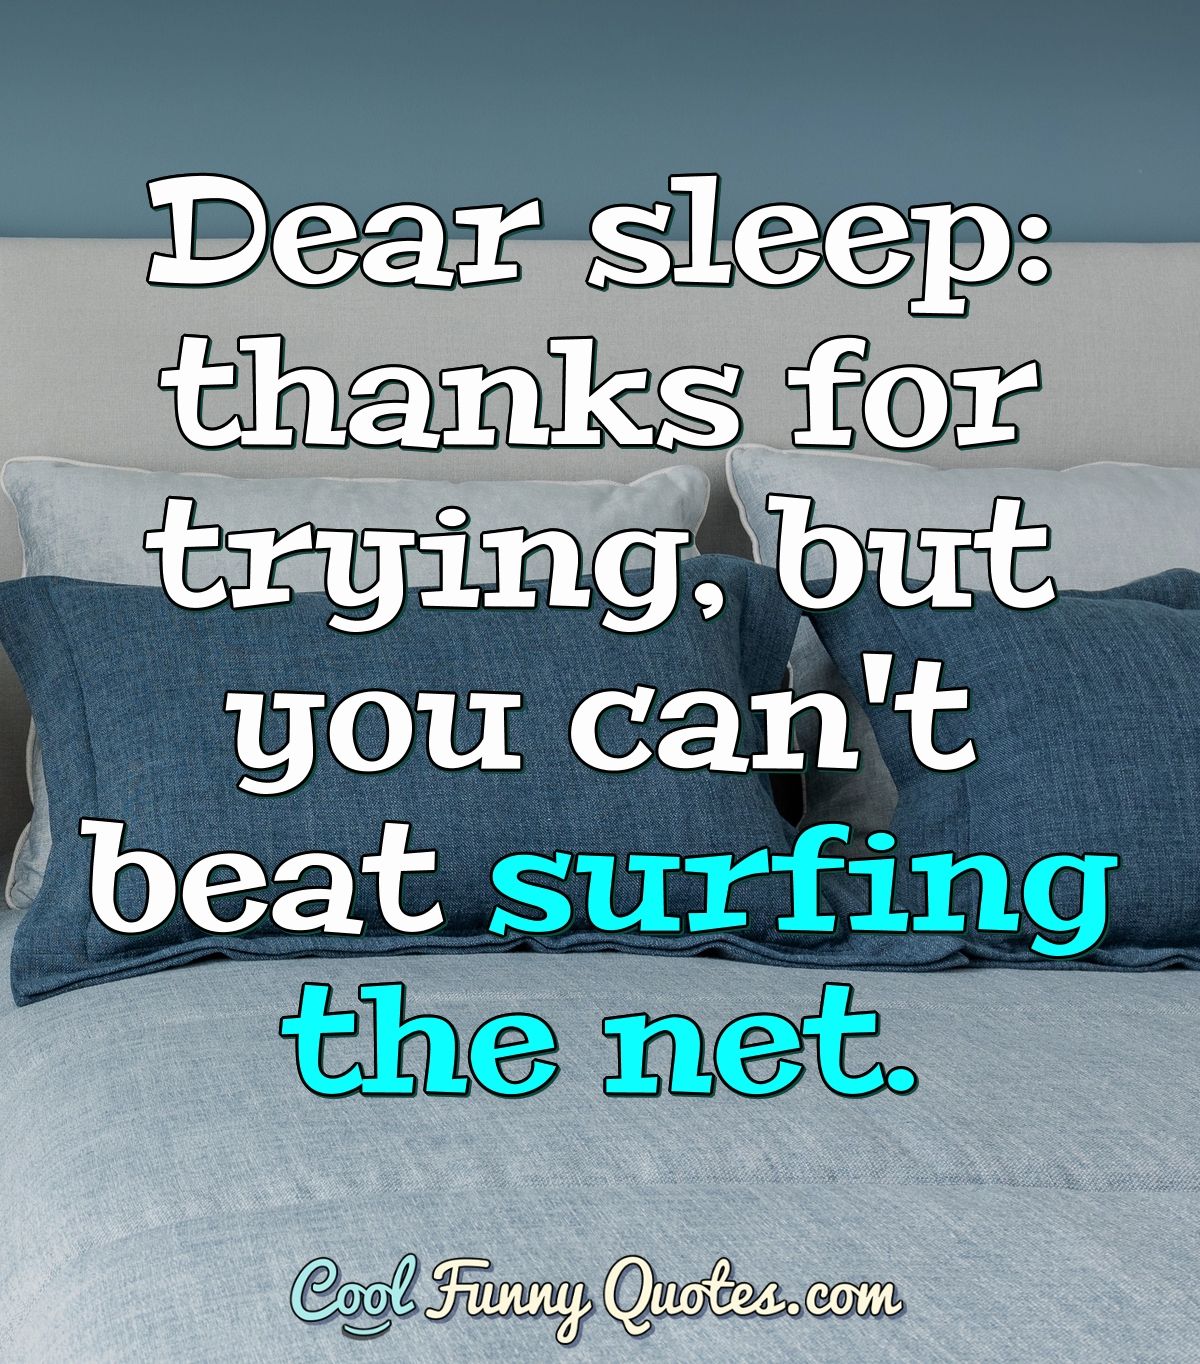 Dear sleep: thanks for trying, but you can't beat surfing the net. - Anonymous